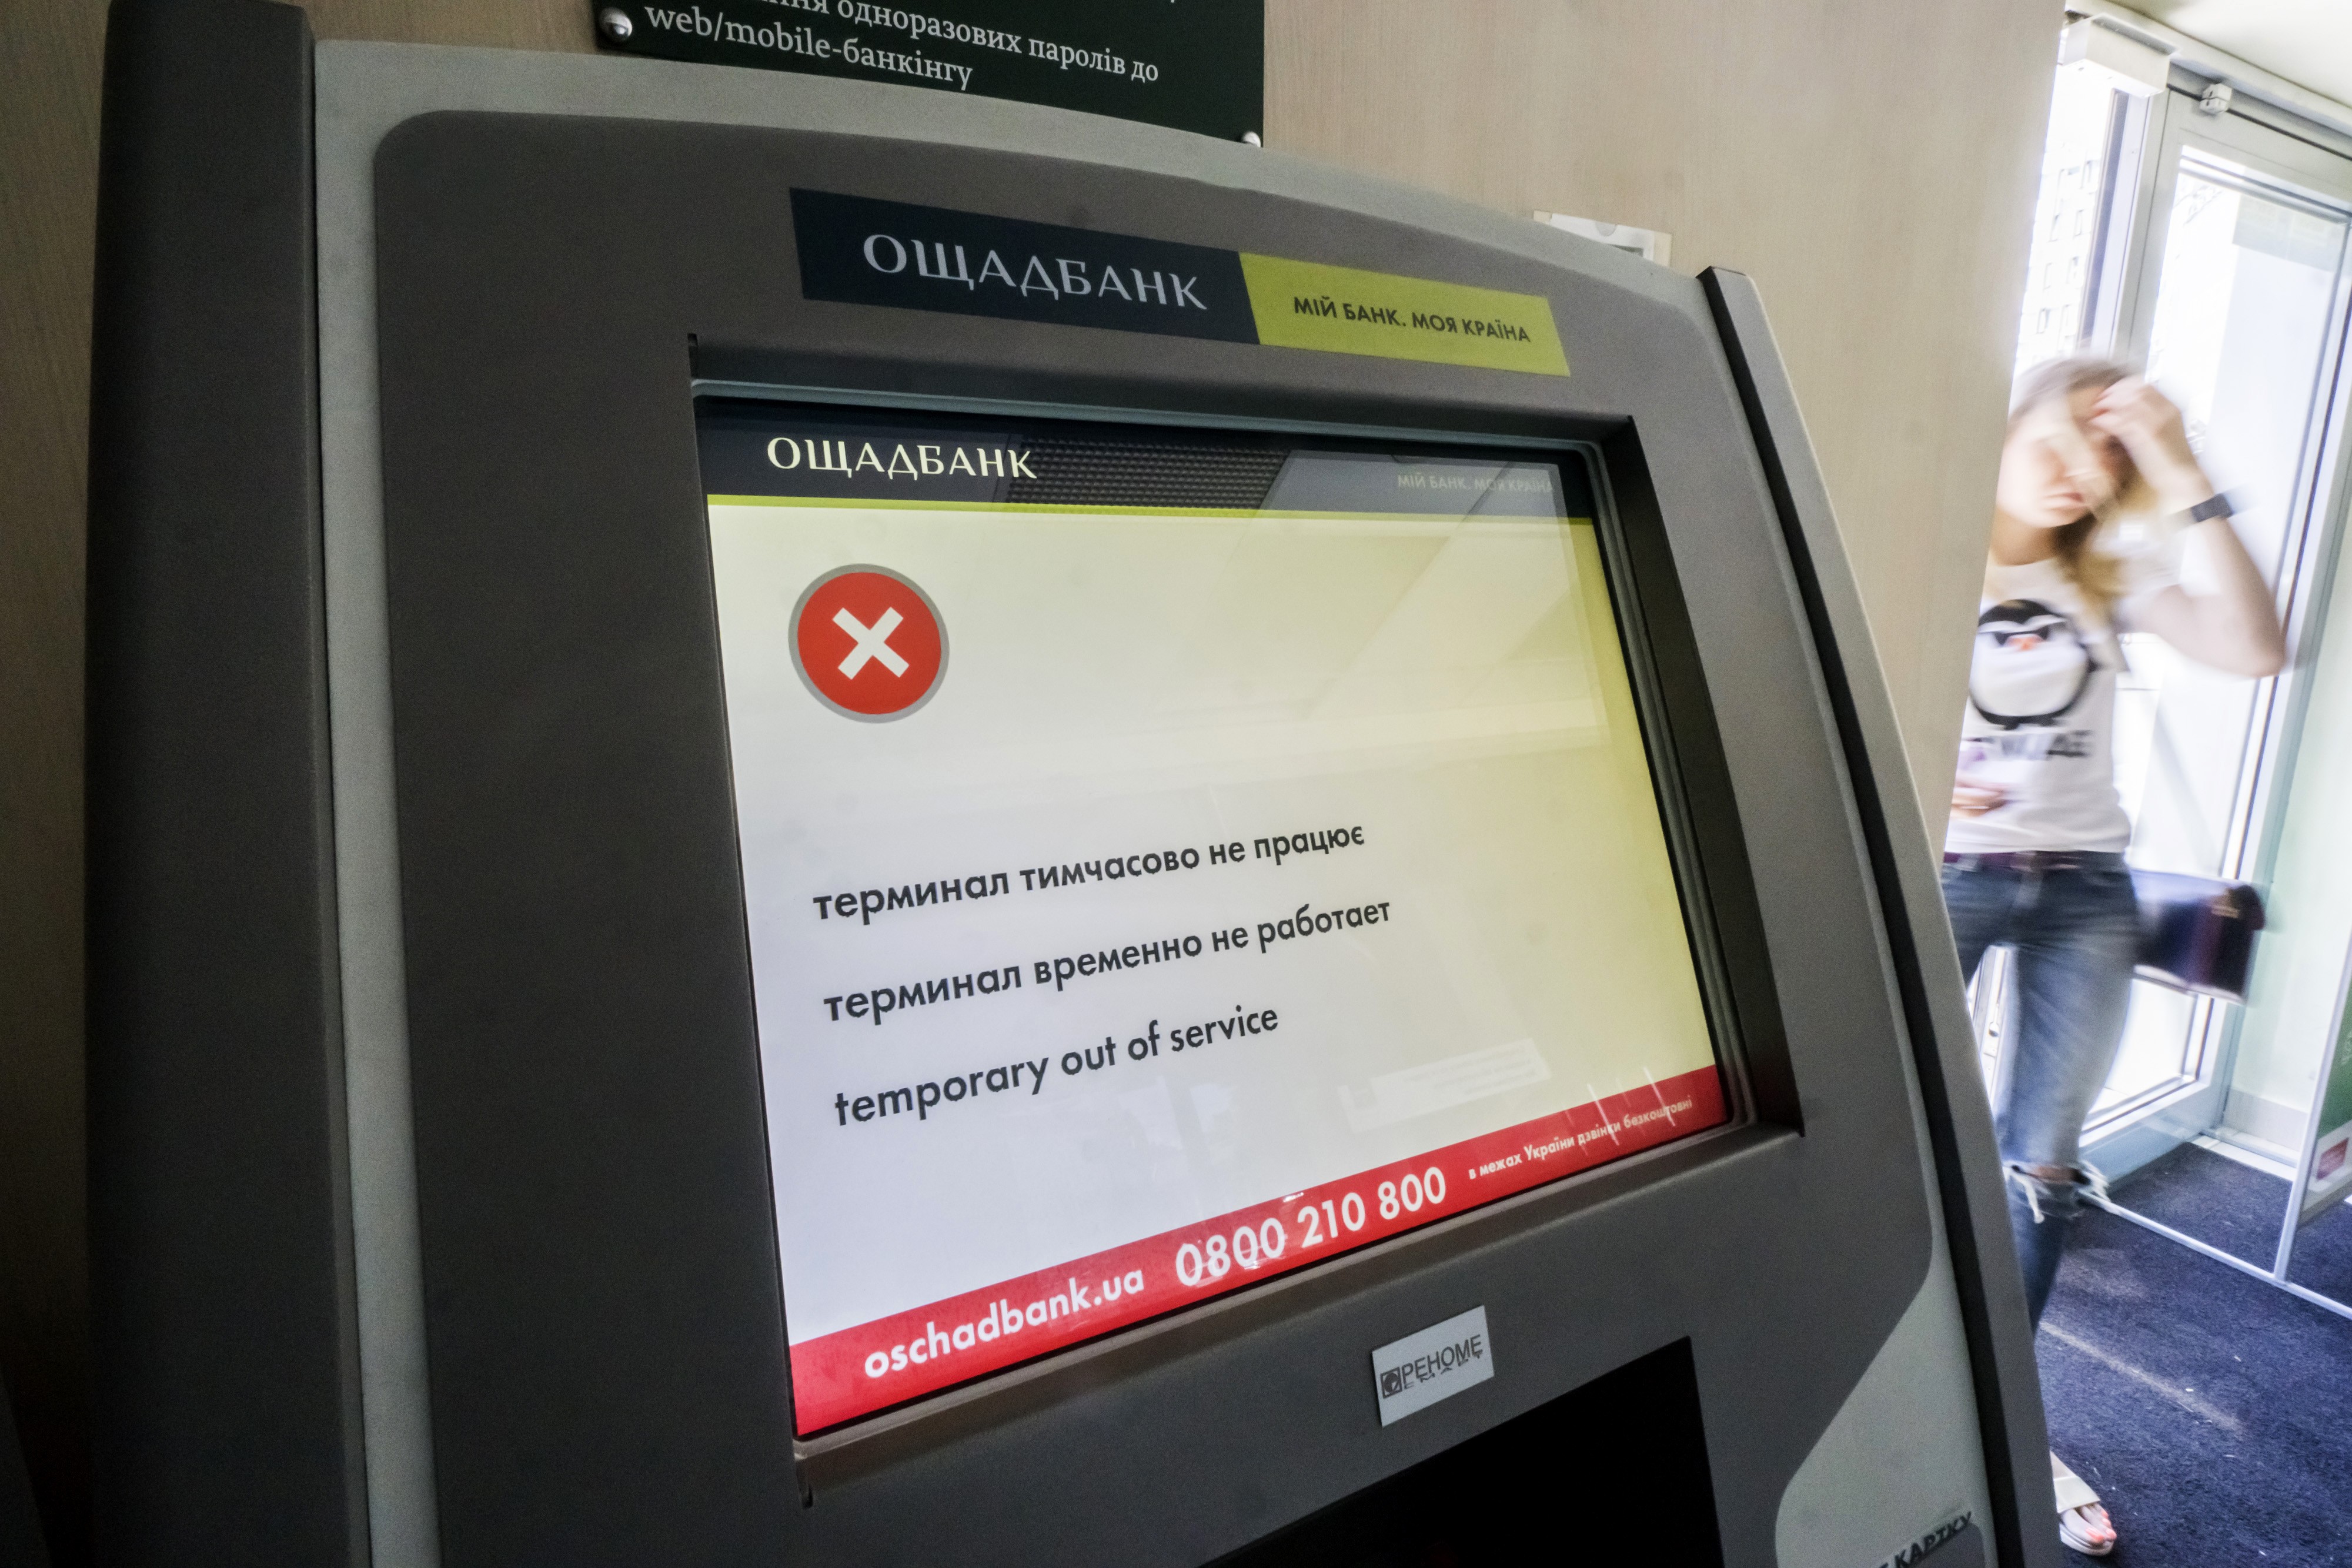 An “out of service” notice is displayed on the screen of an ATM at a bank infected by the Petya ransomware computer virus in Kiev in late June. The cyberattack, similar to WannaCry, began in Ukraine, infecting computer networks and demanding US$300 in cryptocurrency to unlock their systems before spreading to different parts of the world. Photo: Bloomberg